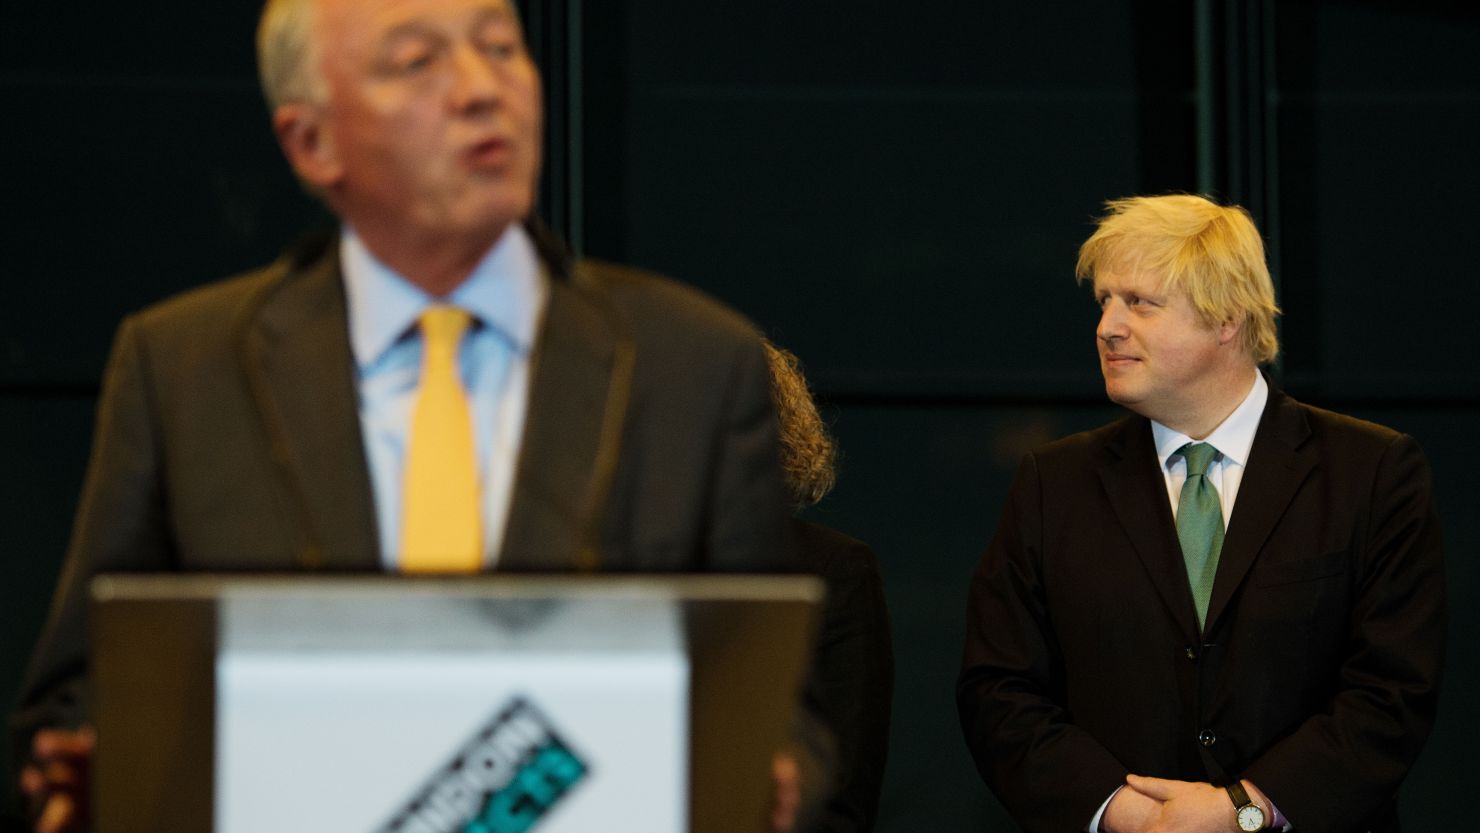 Boris Johnson (R) looks on as his main opponent Ken Livingstone speaks after the election results are announced.